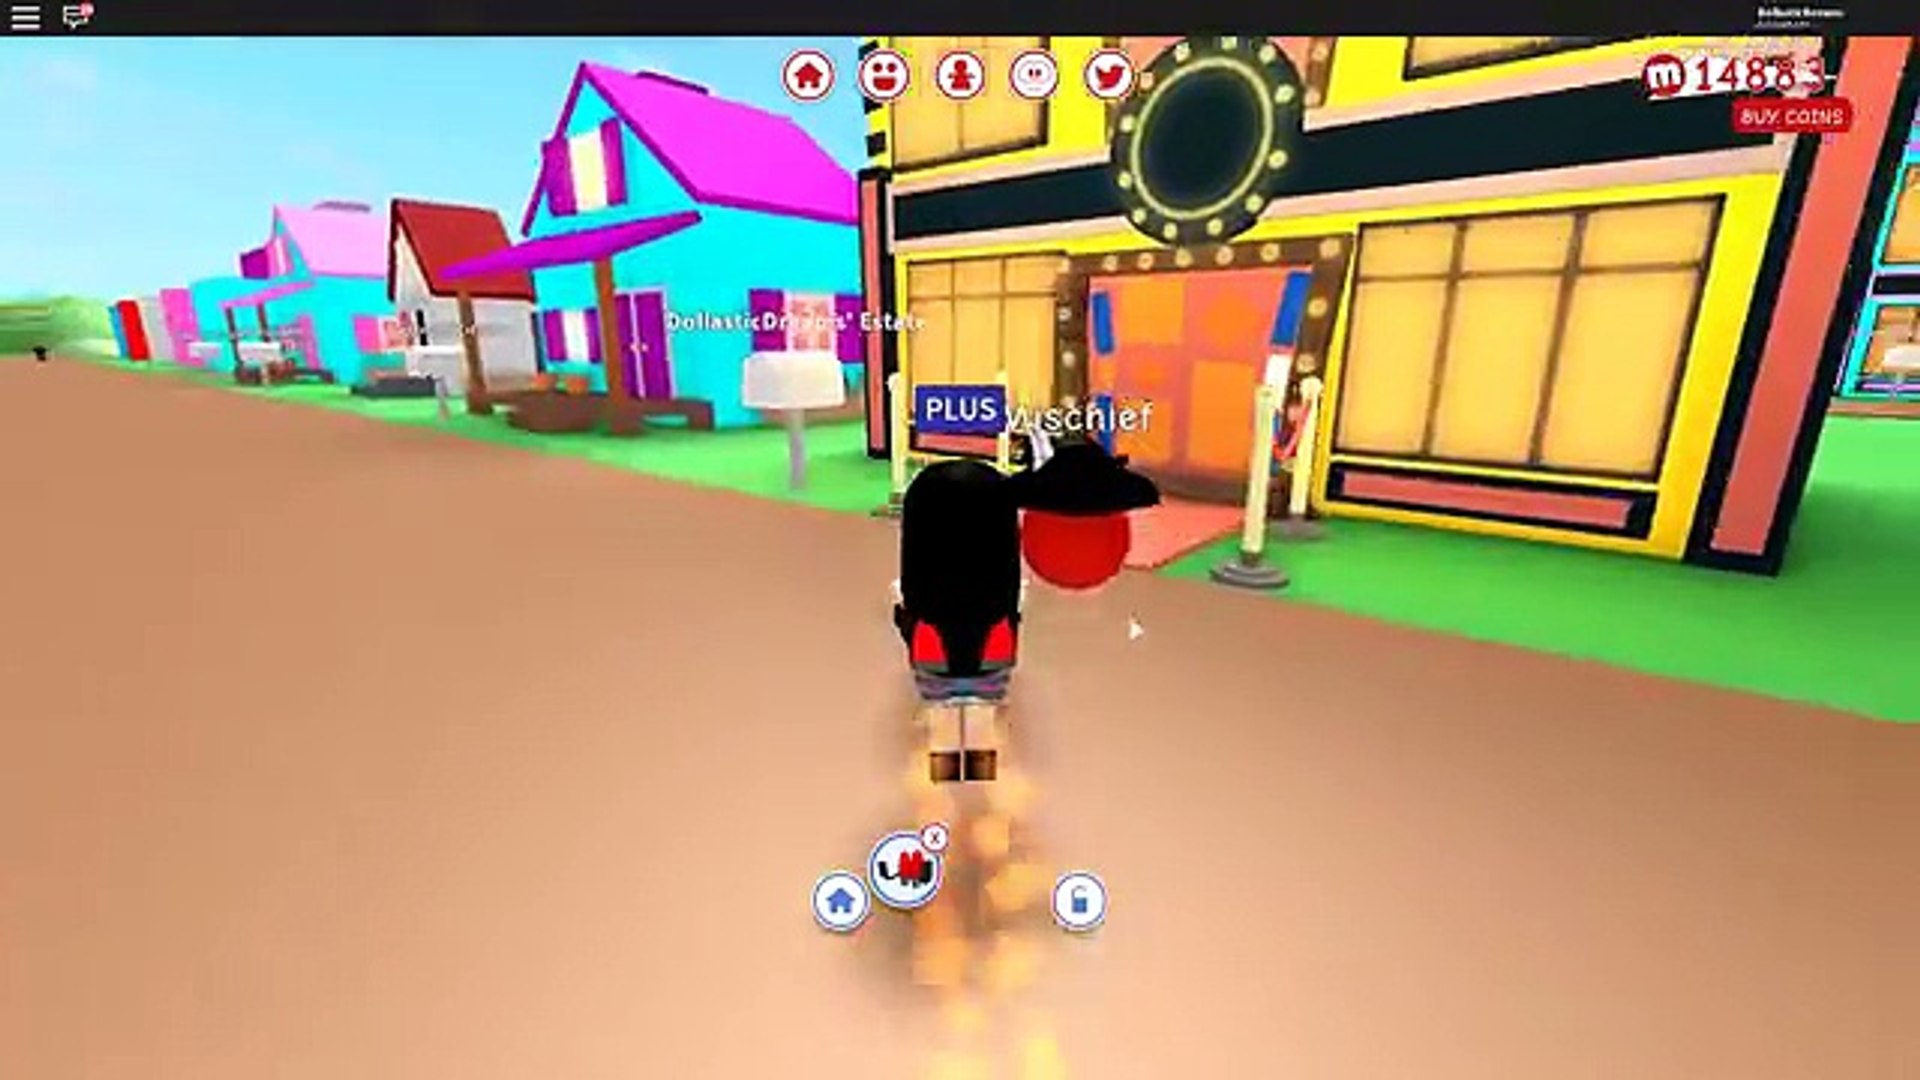 Lastic Goes Shopping Splurging New Meep Toys Jet Pack Roblox Meepcity Dollastic Plays Dailymotion Video - baby alan roblox meep city